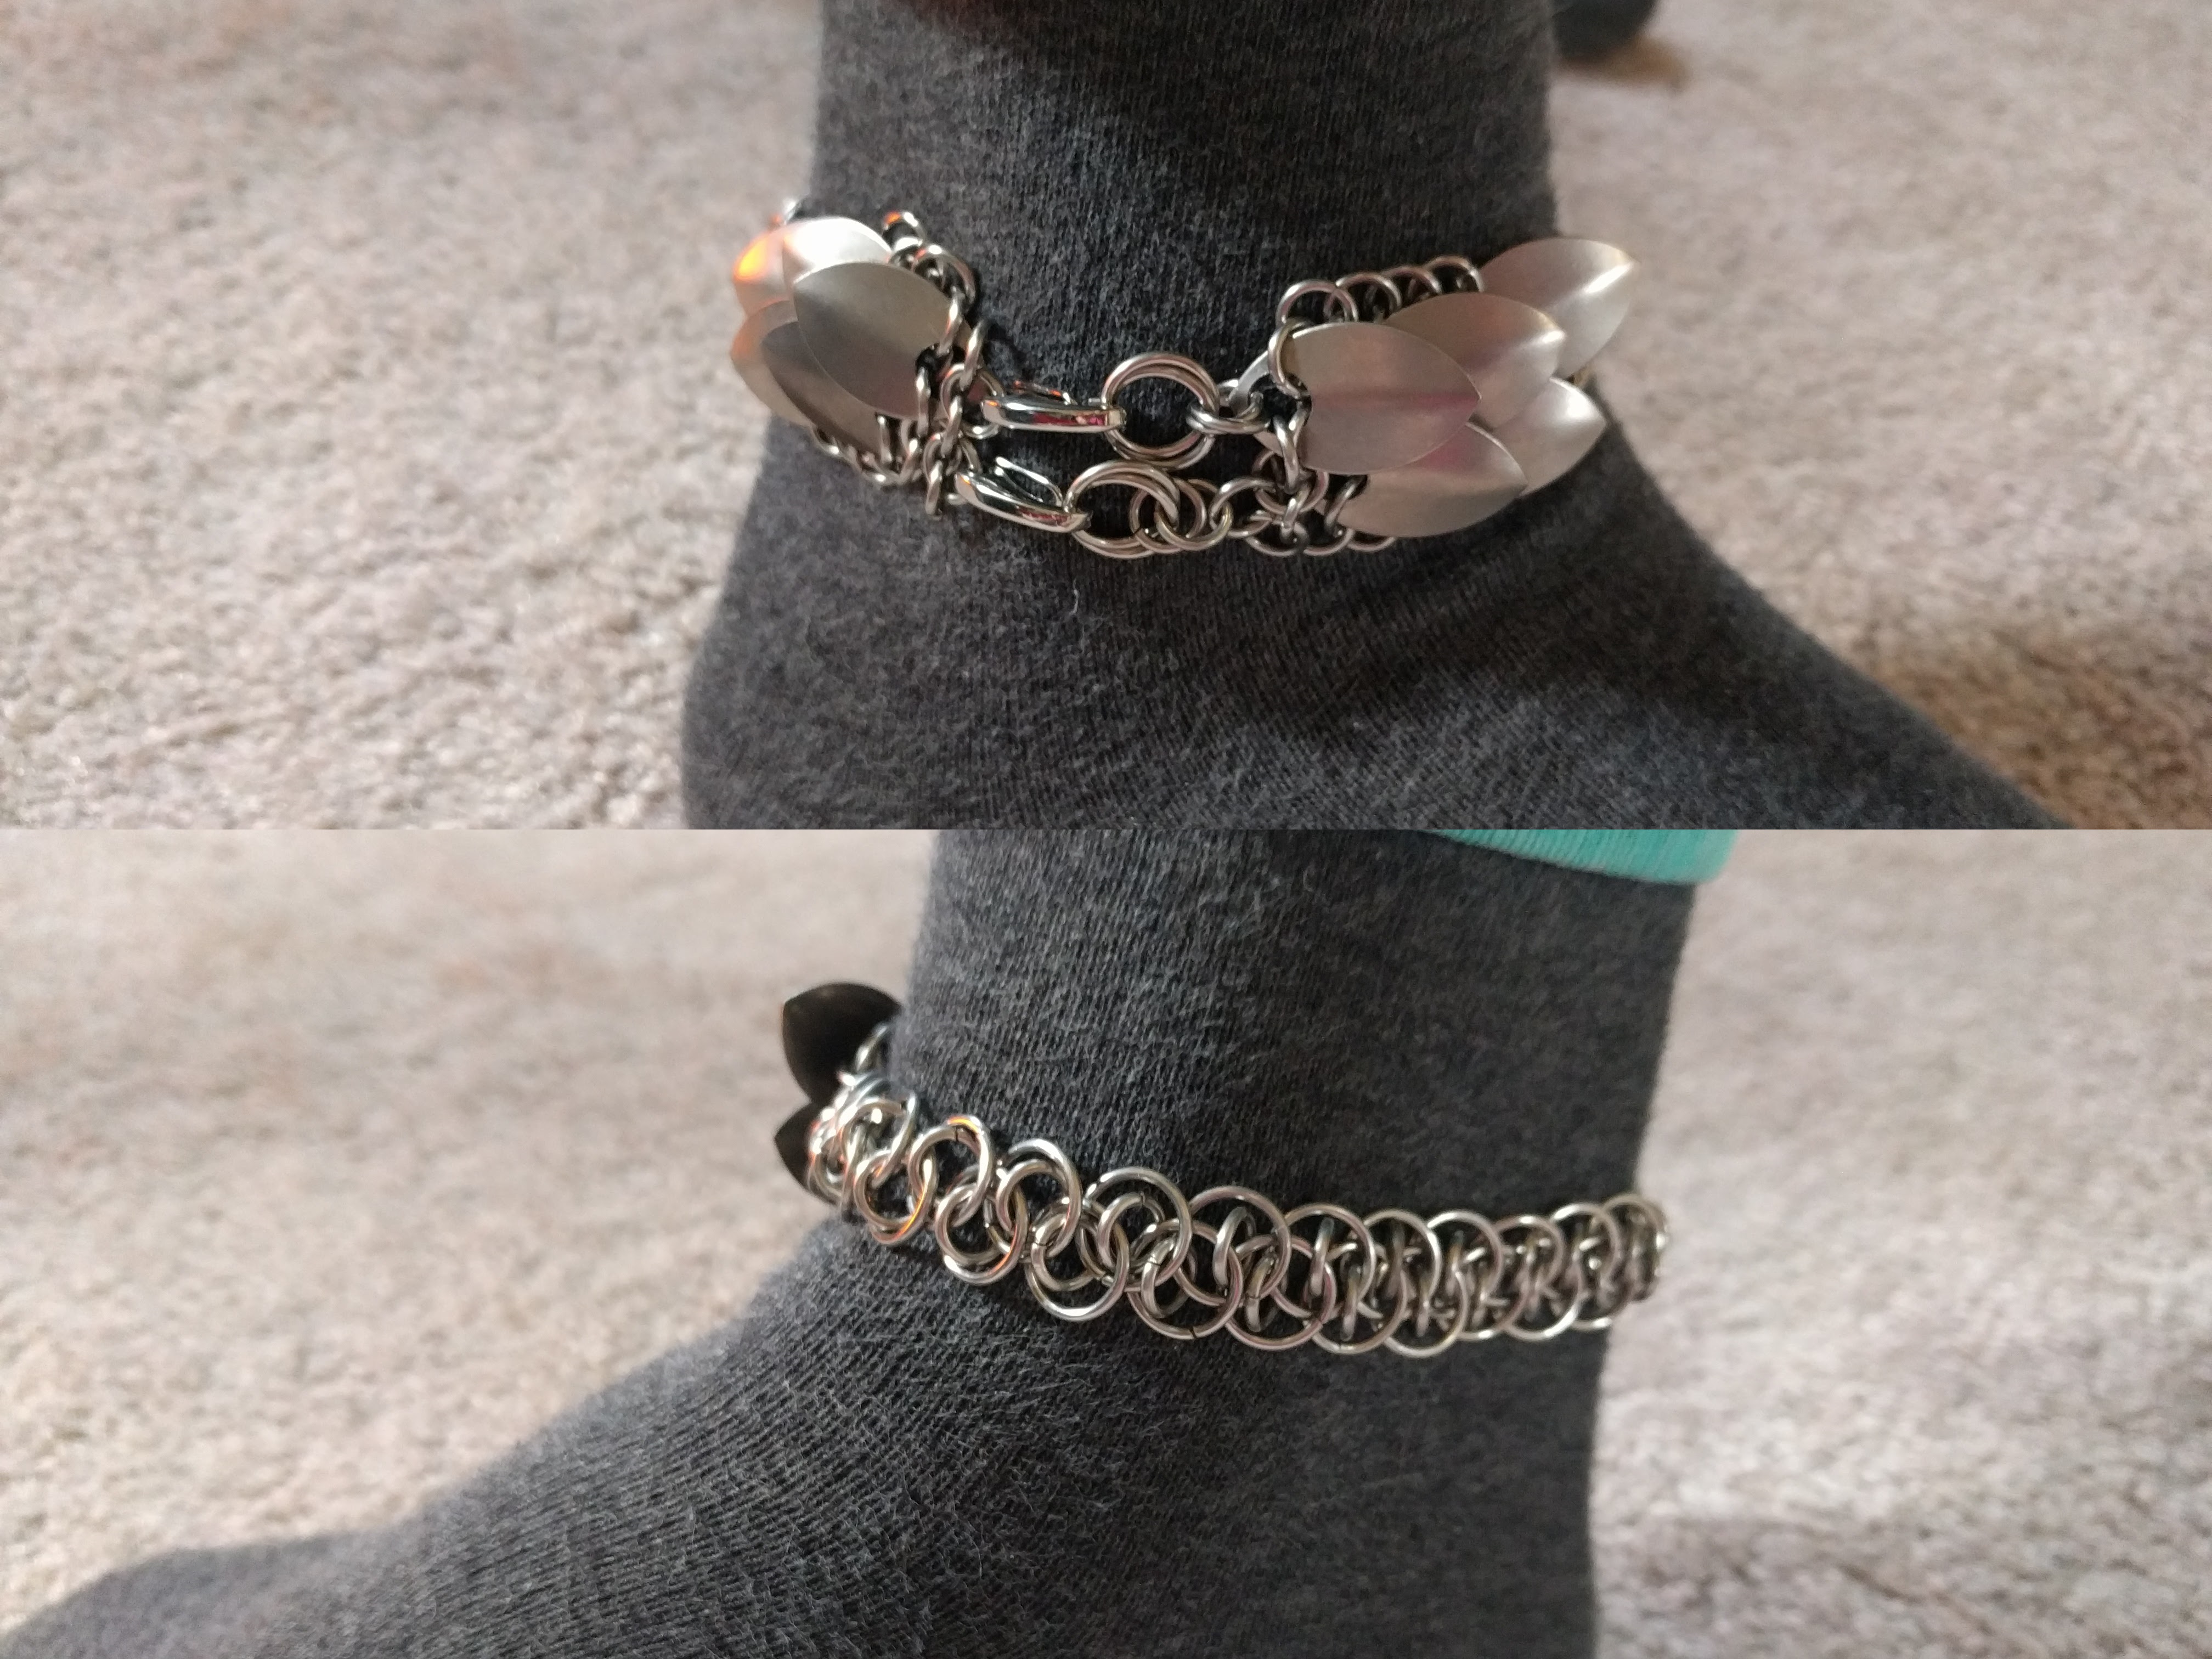 A shiny steel anklet with scales resembling wings